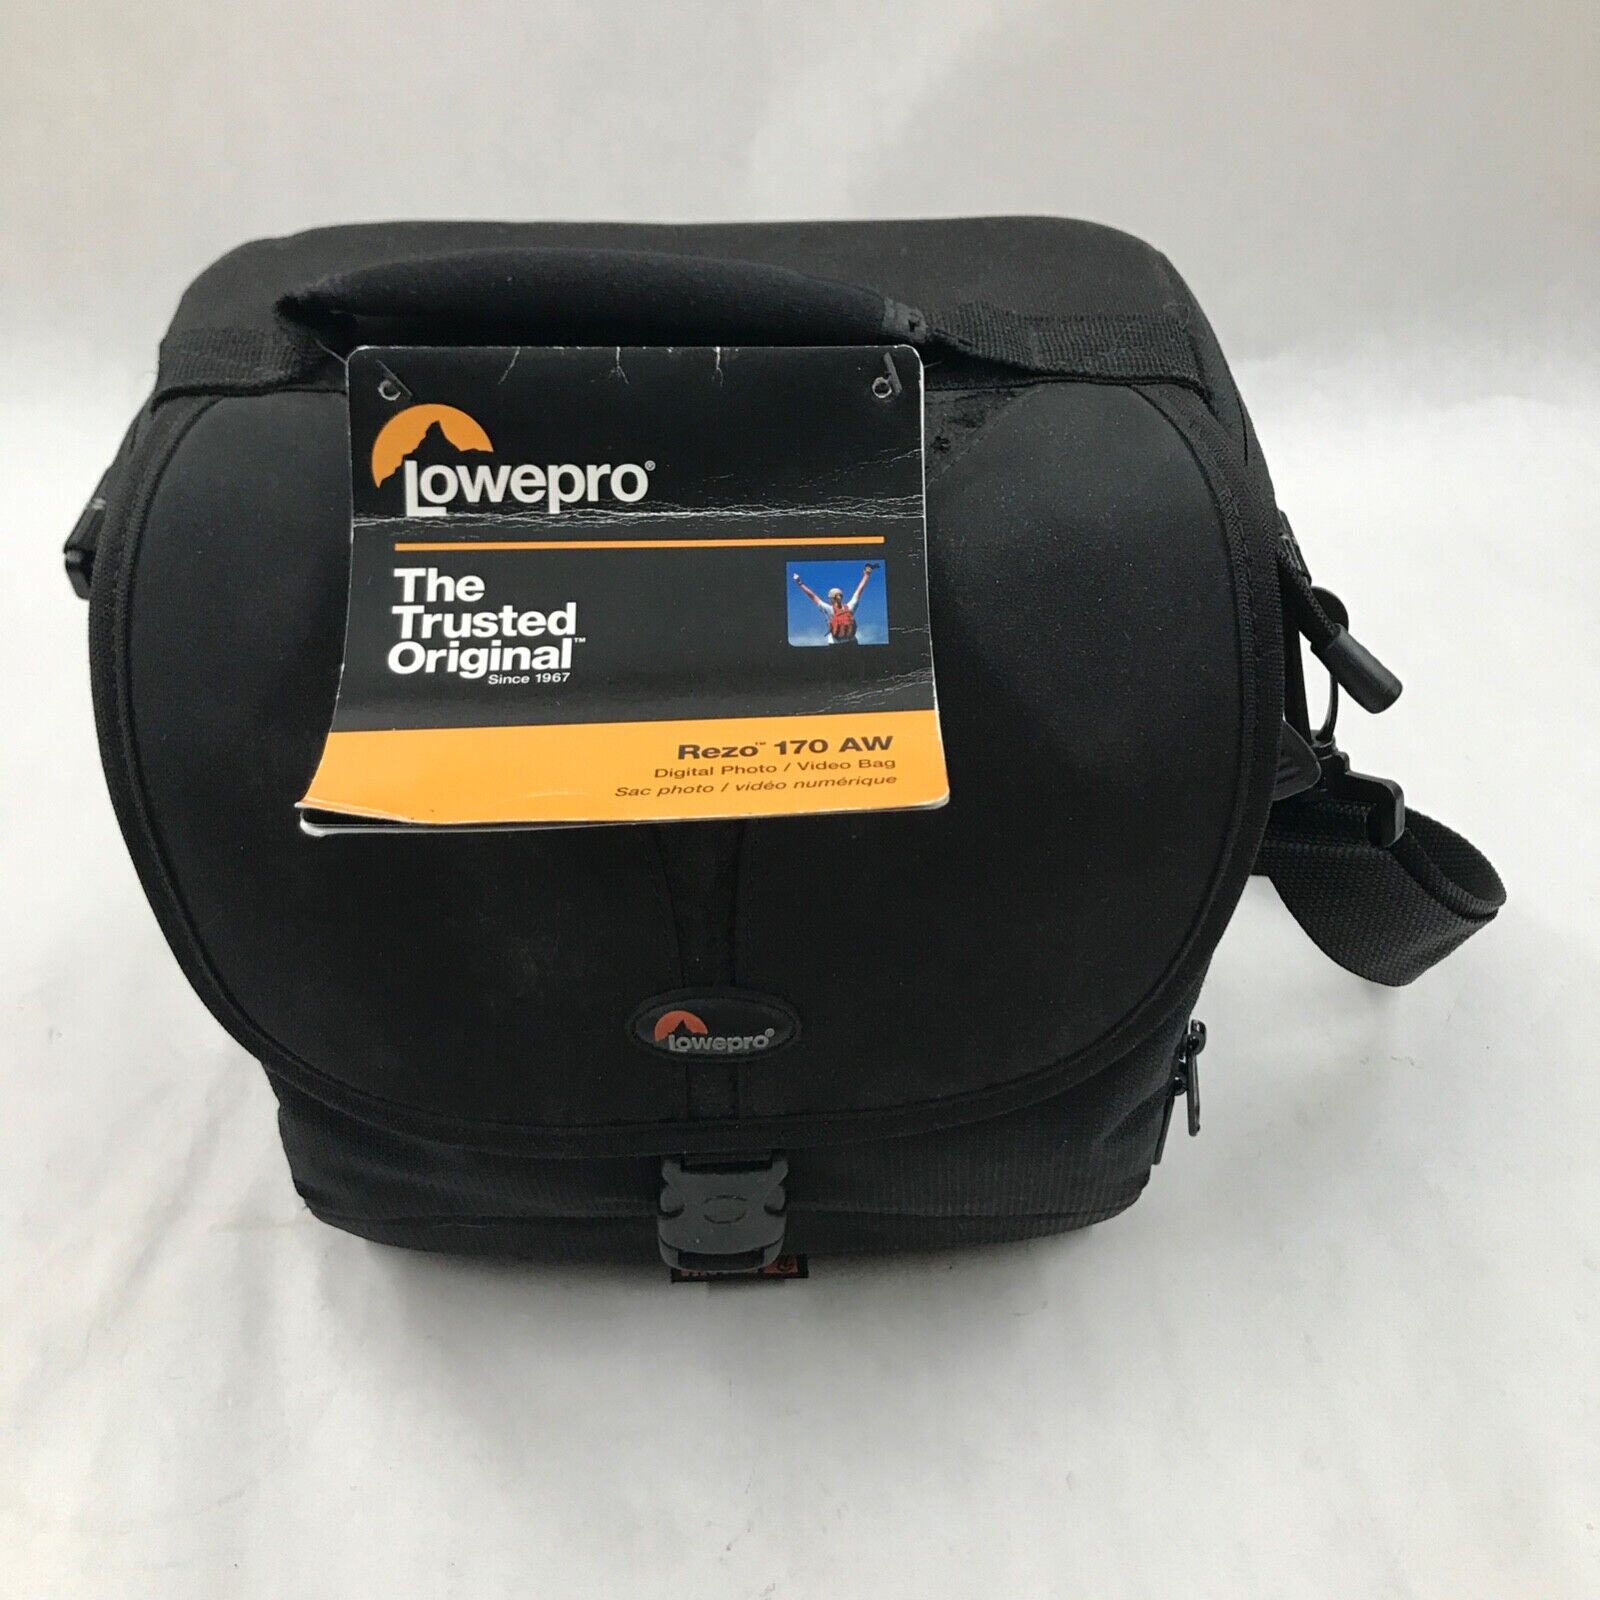 LOWEPRO REZO 170 AW ALL-WEATHER SHOULDER BAG BLACK NEW WITH TAG See Photos